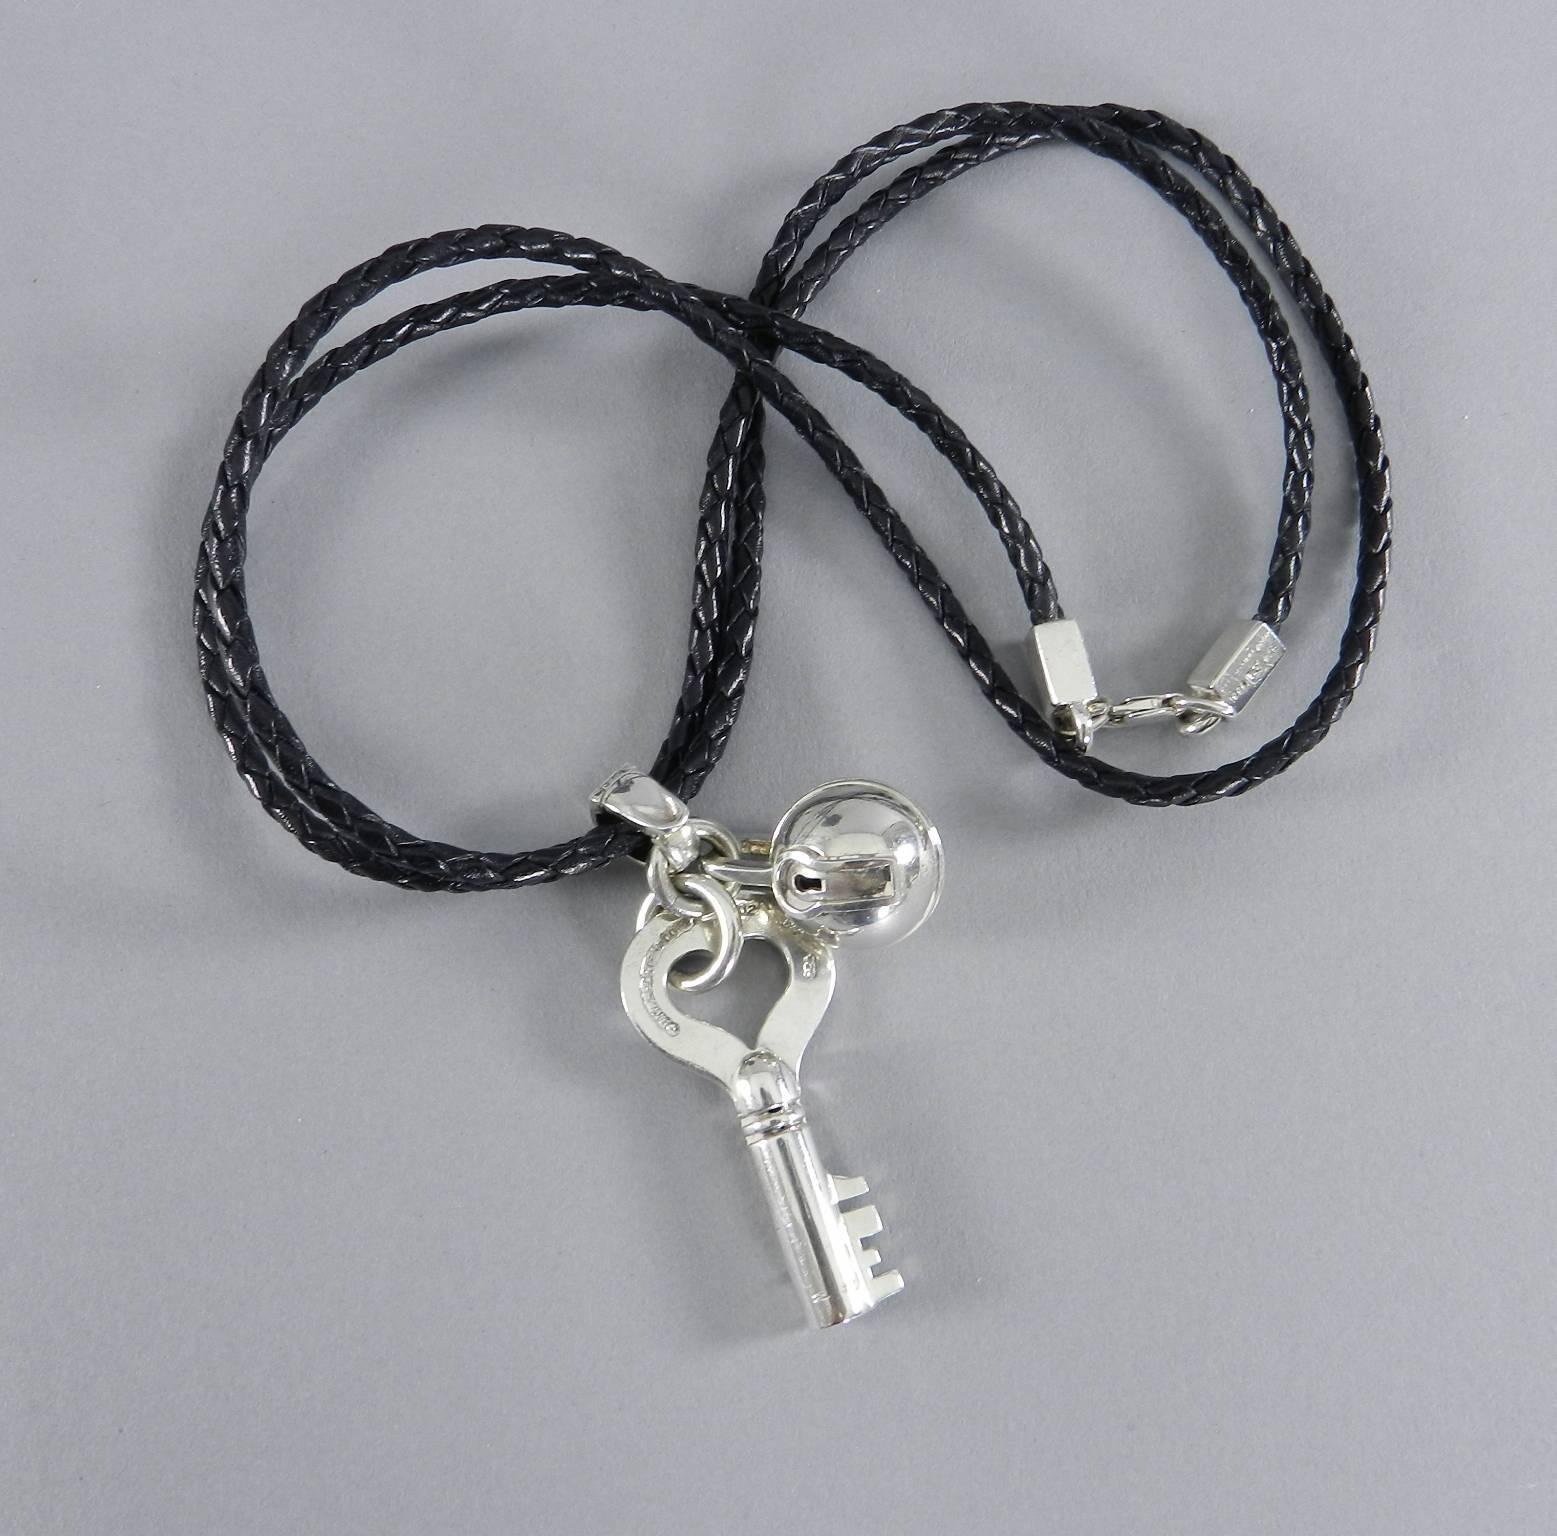 Women's Barry Kieselstein Cord Sterling and Leather Vintage 1999 Key and Lock Necklace